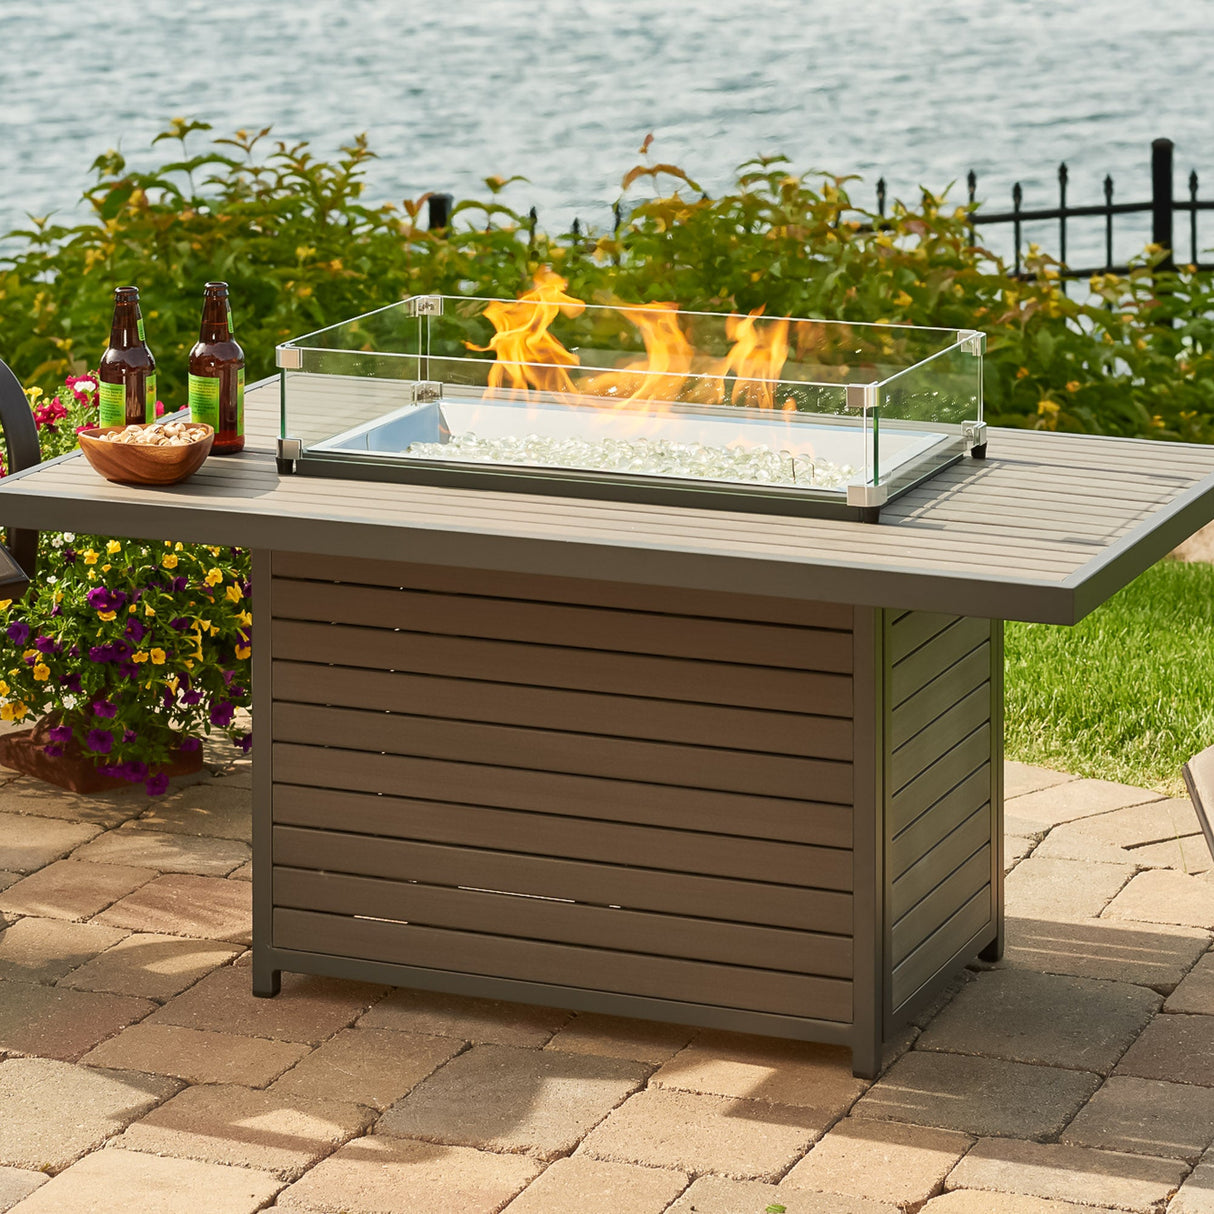 The Brooks Rectangular Gas Fire Pit Table next to a lake with food and drink placed on its top